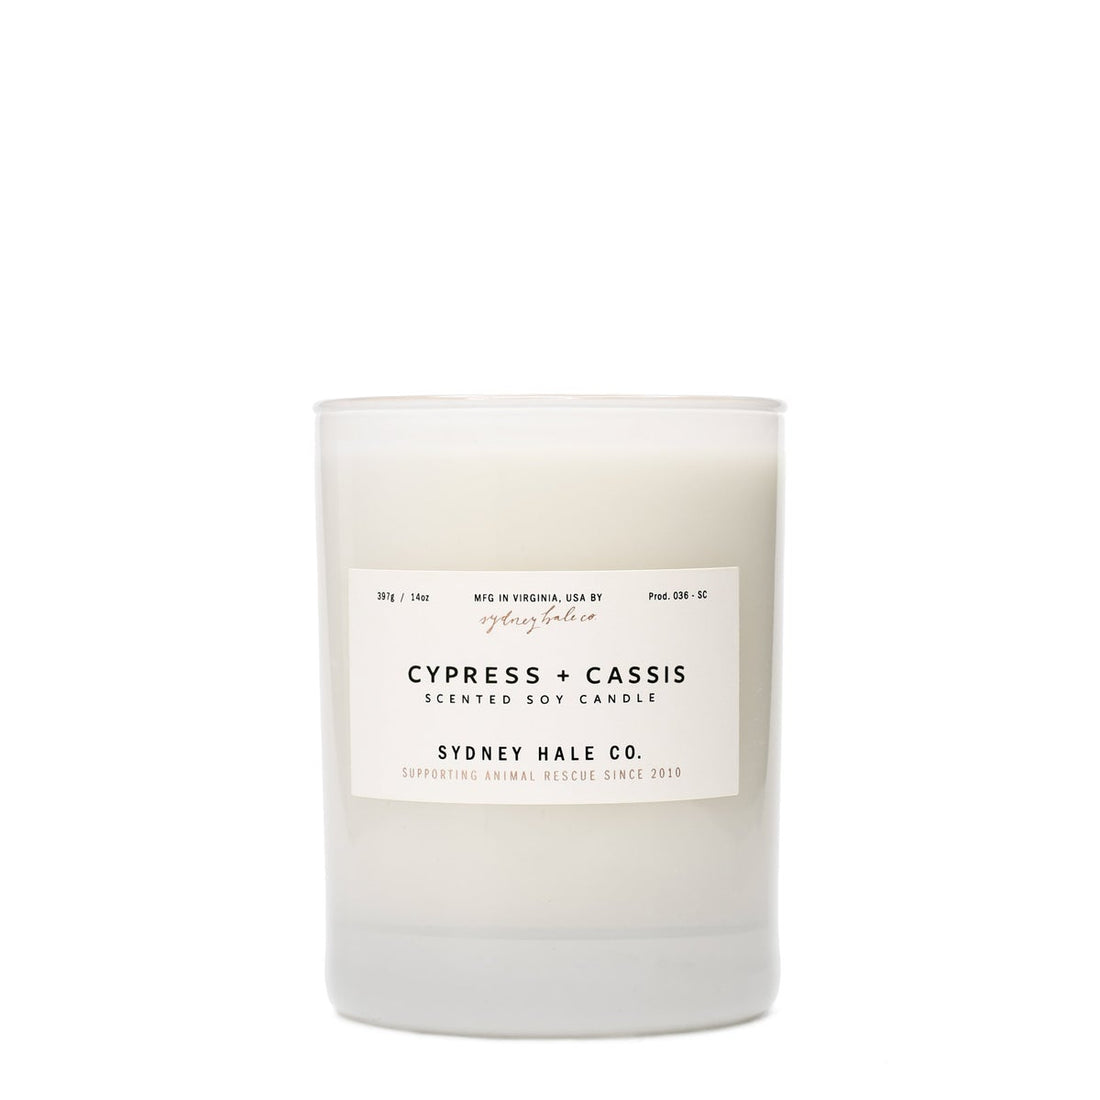 SYDNEY HALE - CYPRESS + CASSIS CANDLE